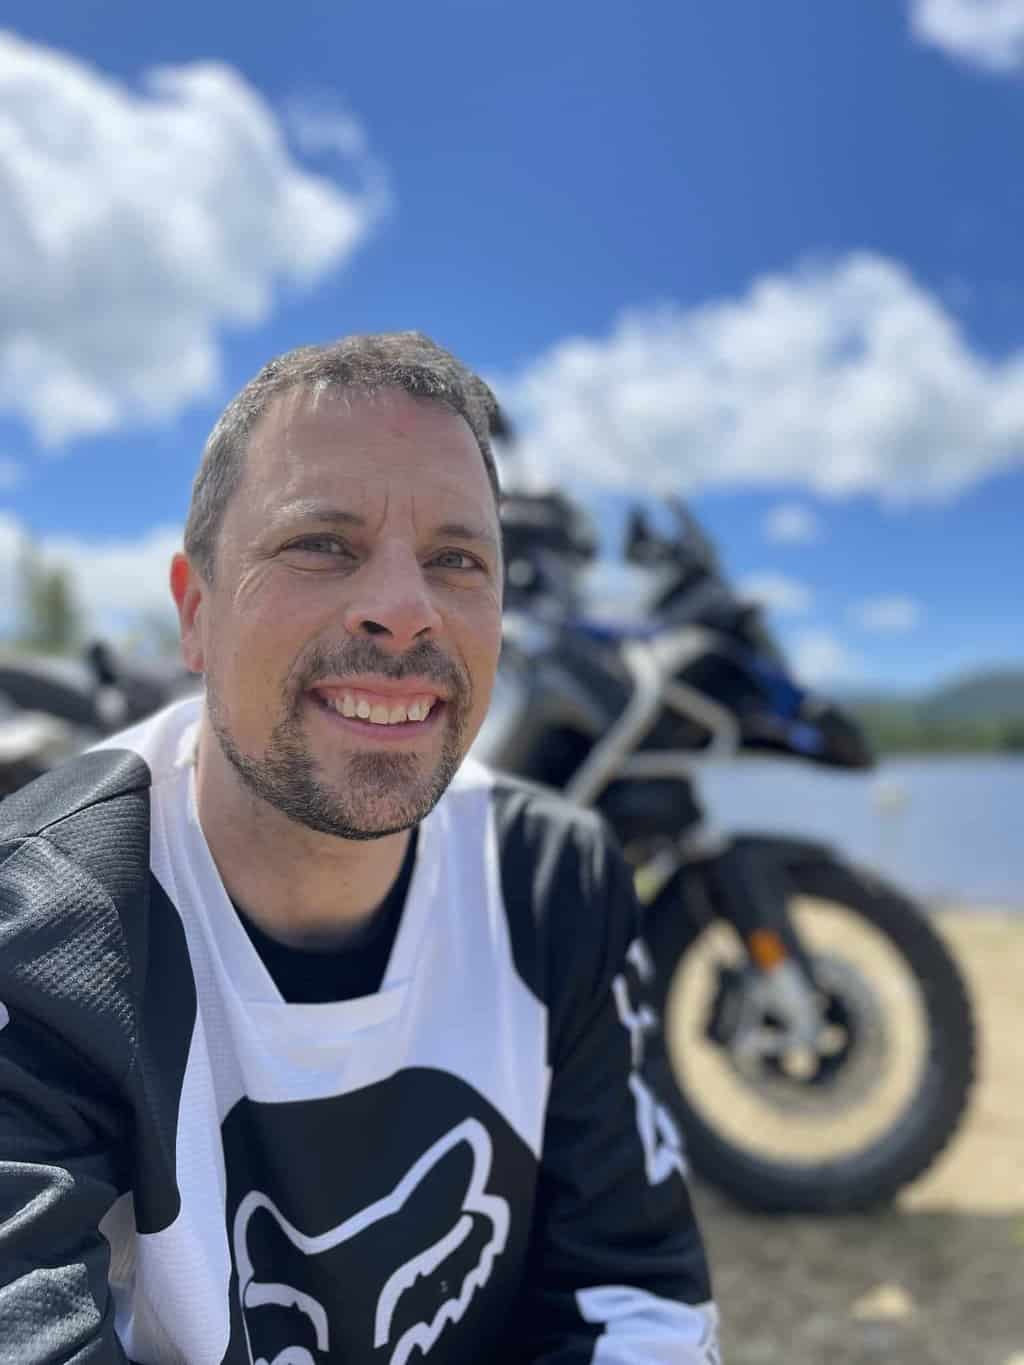 2023 BMW F850 GSA Adventure: A Closer Look at the Features and Performance